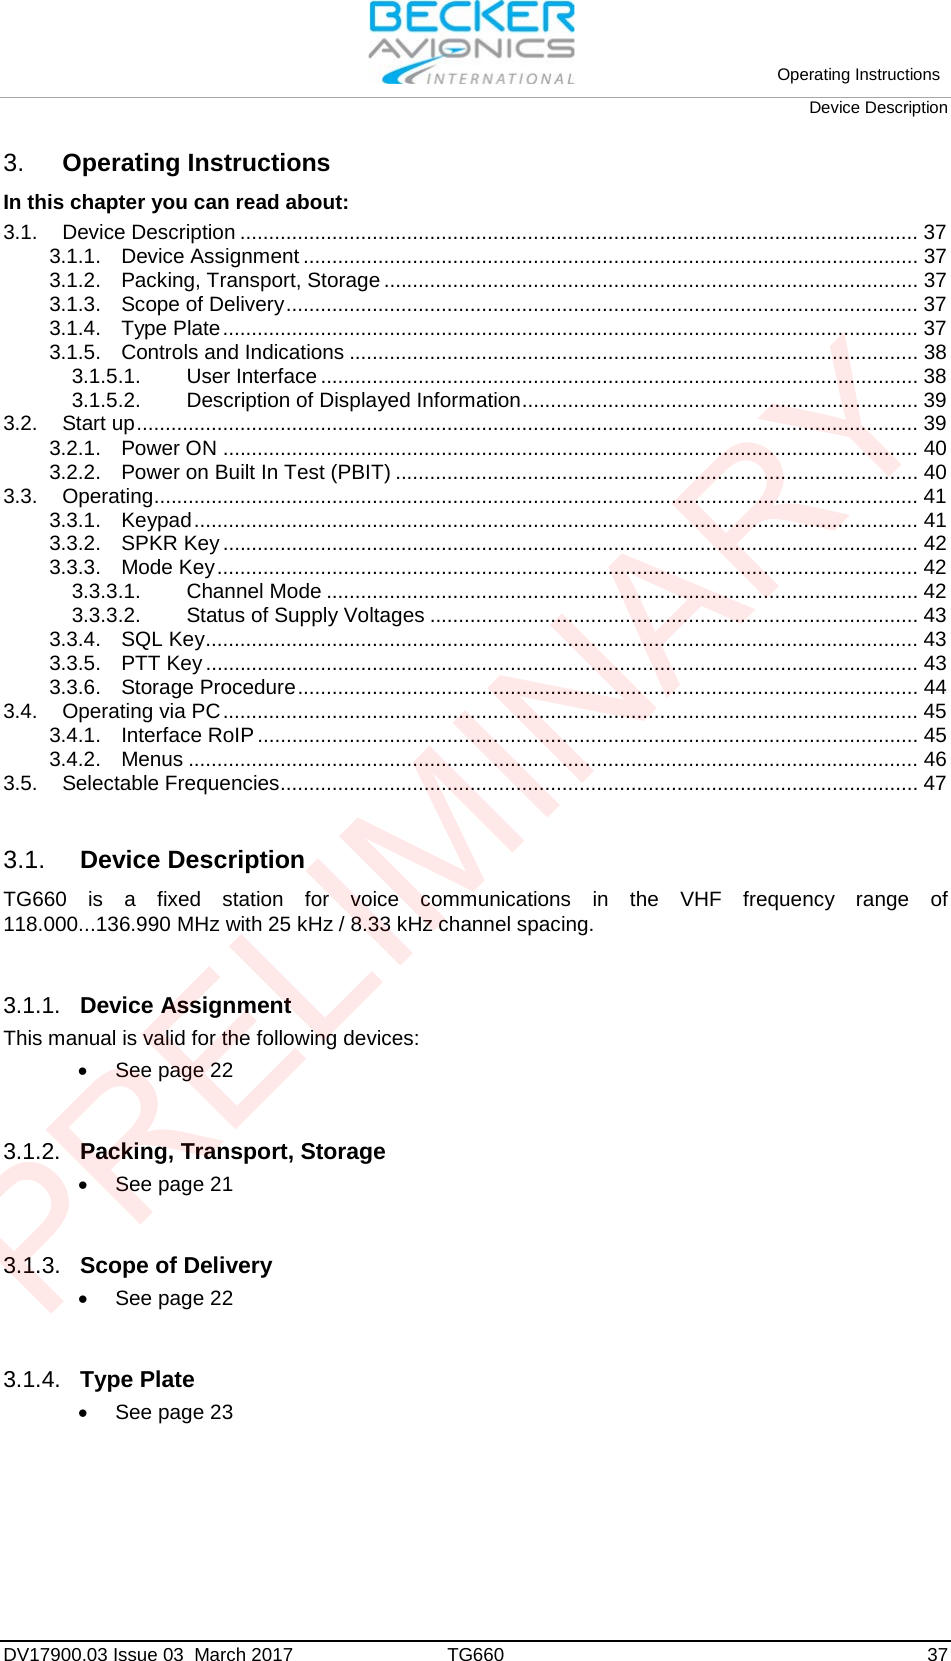 Operating Instructions Device Description DV17900.03 Issue 03  March 2017 TG660 37 3. Operating InstructionsIn this chapter you can read about: 3.1. Device Description ...................................................................................................................... 37 3.1.1. Device Assignment ........................................................................................................... 37 3.1.2. Packing, Transport, Storage ............................................................................................. 37 3.1.3. Scope of Delivery .............................................................................................................. 37 3.1.4. Type Plate ......................................................................................................................... 37 3.1.5. Controls and Indications ................................................................................................... 38 3.1.5.1. User Interface ........................................................................................................ 38 3.1.5.2. Description of Displayed Information ..................................................................... 39 3.2. Start up ........................................................................................................................................ 39 3.2.1. Power ON ......................................................................................................................... 40 3.2.2. Power on Built In Test (PBIT) ........................................................................................... 40 3.3. Operating..................................................................................................................................... 41 3.3.1. Keypad .............................................................................................................................. 41 3.3.2. SPKR Key ......................................................................................................................... 42 3.3.3. Mode Key .......................................................................................................................... 42 3.3.3.1. Channel Mode ....................................................................................................... 42 3.3.3.2. Status of Supply Voltages ..................................................................................... 43 3.3.4. SQL Key ............................................................................................................................ 43 3.3.5. PTT Key ............................................................................................................................ 43 3.3.6. Storage Procedure ............................................................................................................ 44 3.4. Operating via PC ......................................................................................................................... 45 3.4.1. Interface RoIP ................................................................................................................... 45 3.4.2. Menus ............................................................................................................................... 46 3.5. Selectable Frequencies ............................................................................................................... 47 3.1. Device Description TG660 is a fixed station for voice communications in the VHF frequency range of 118.000...136.990 MHz with 25 kHz / 8.33 kHz channel spacing. 3.1.1. Device Assignment This manual is valid for the following devices: •See page 223.1.2. Packing, Transport, Storage •See page 213.1.3. Scope of Delivery •See page 223.1.4. Type Plate •See page 23PRELIMINARY